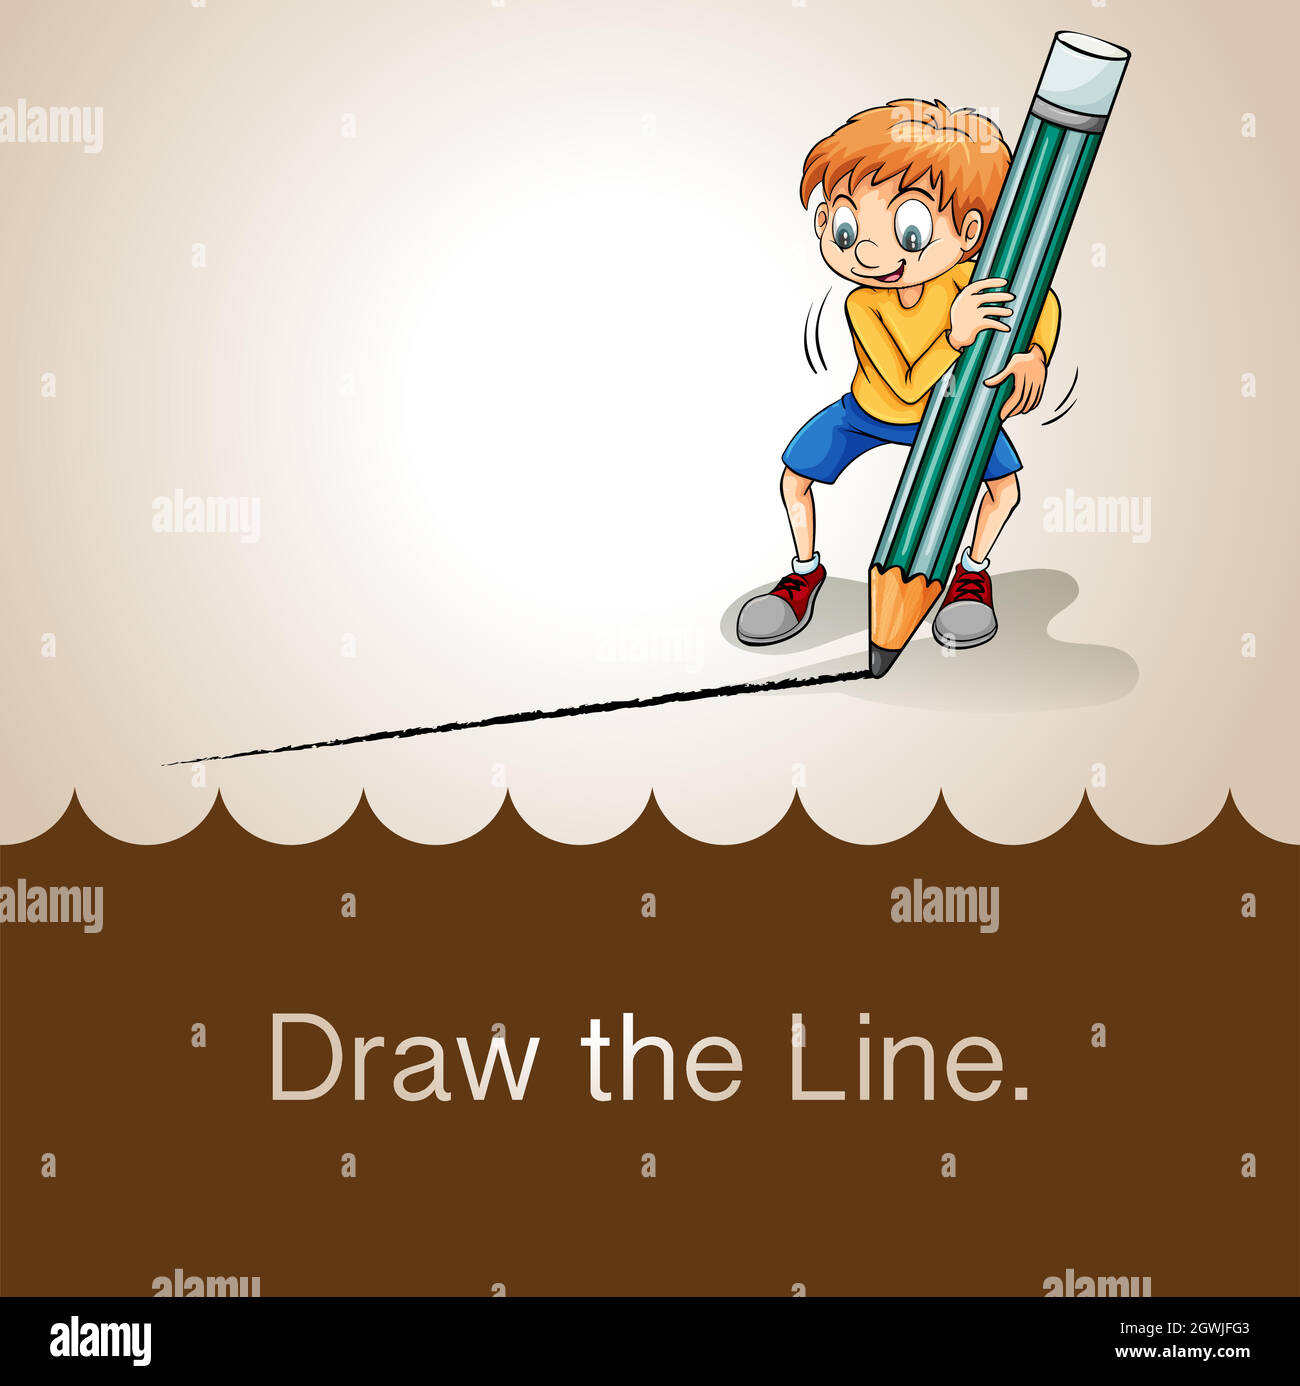 Old saying draw the line Stock Vector